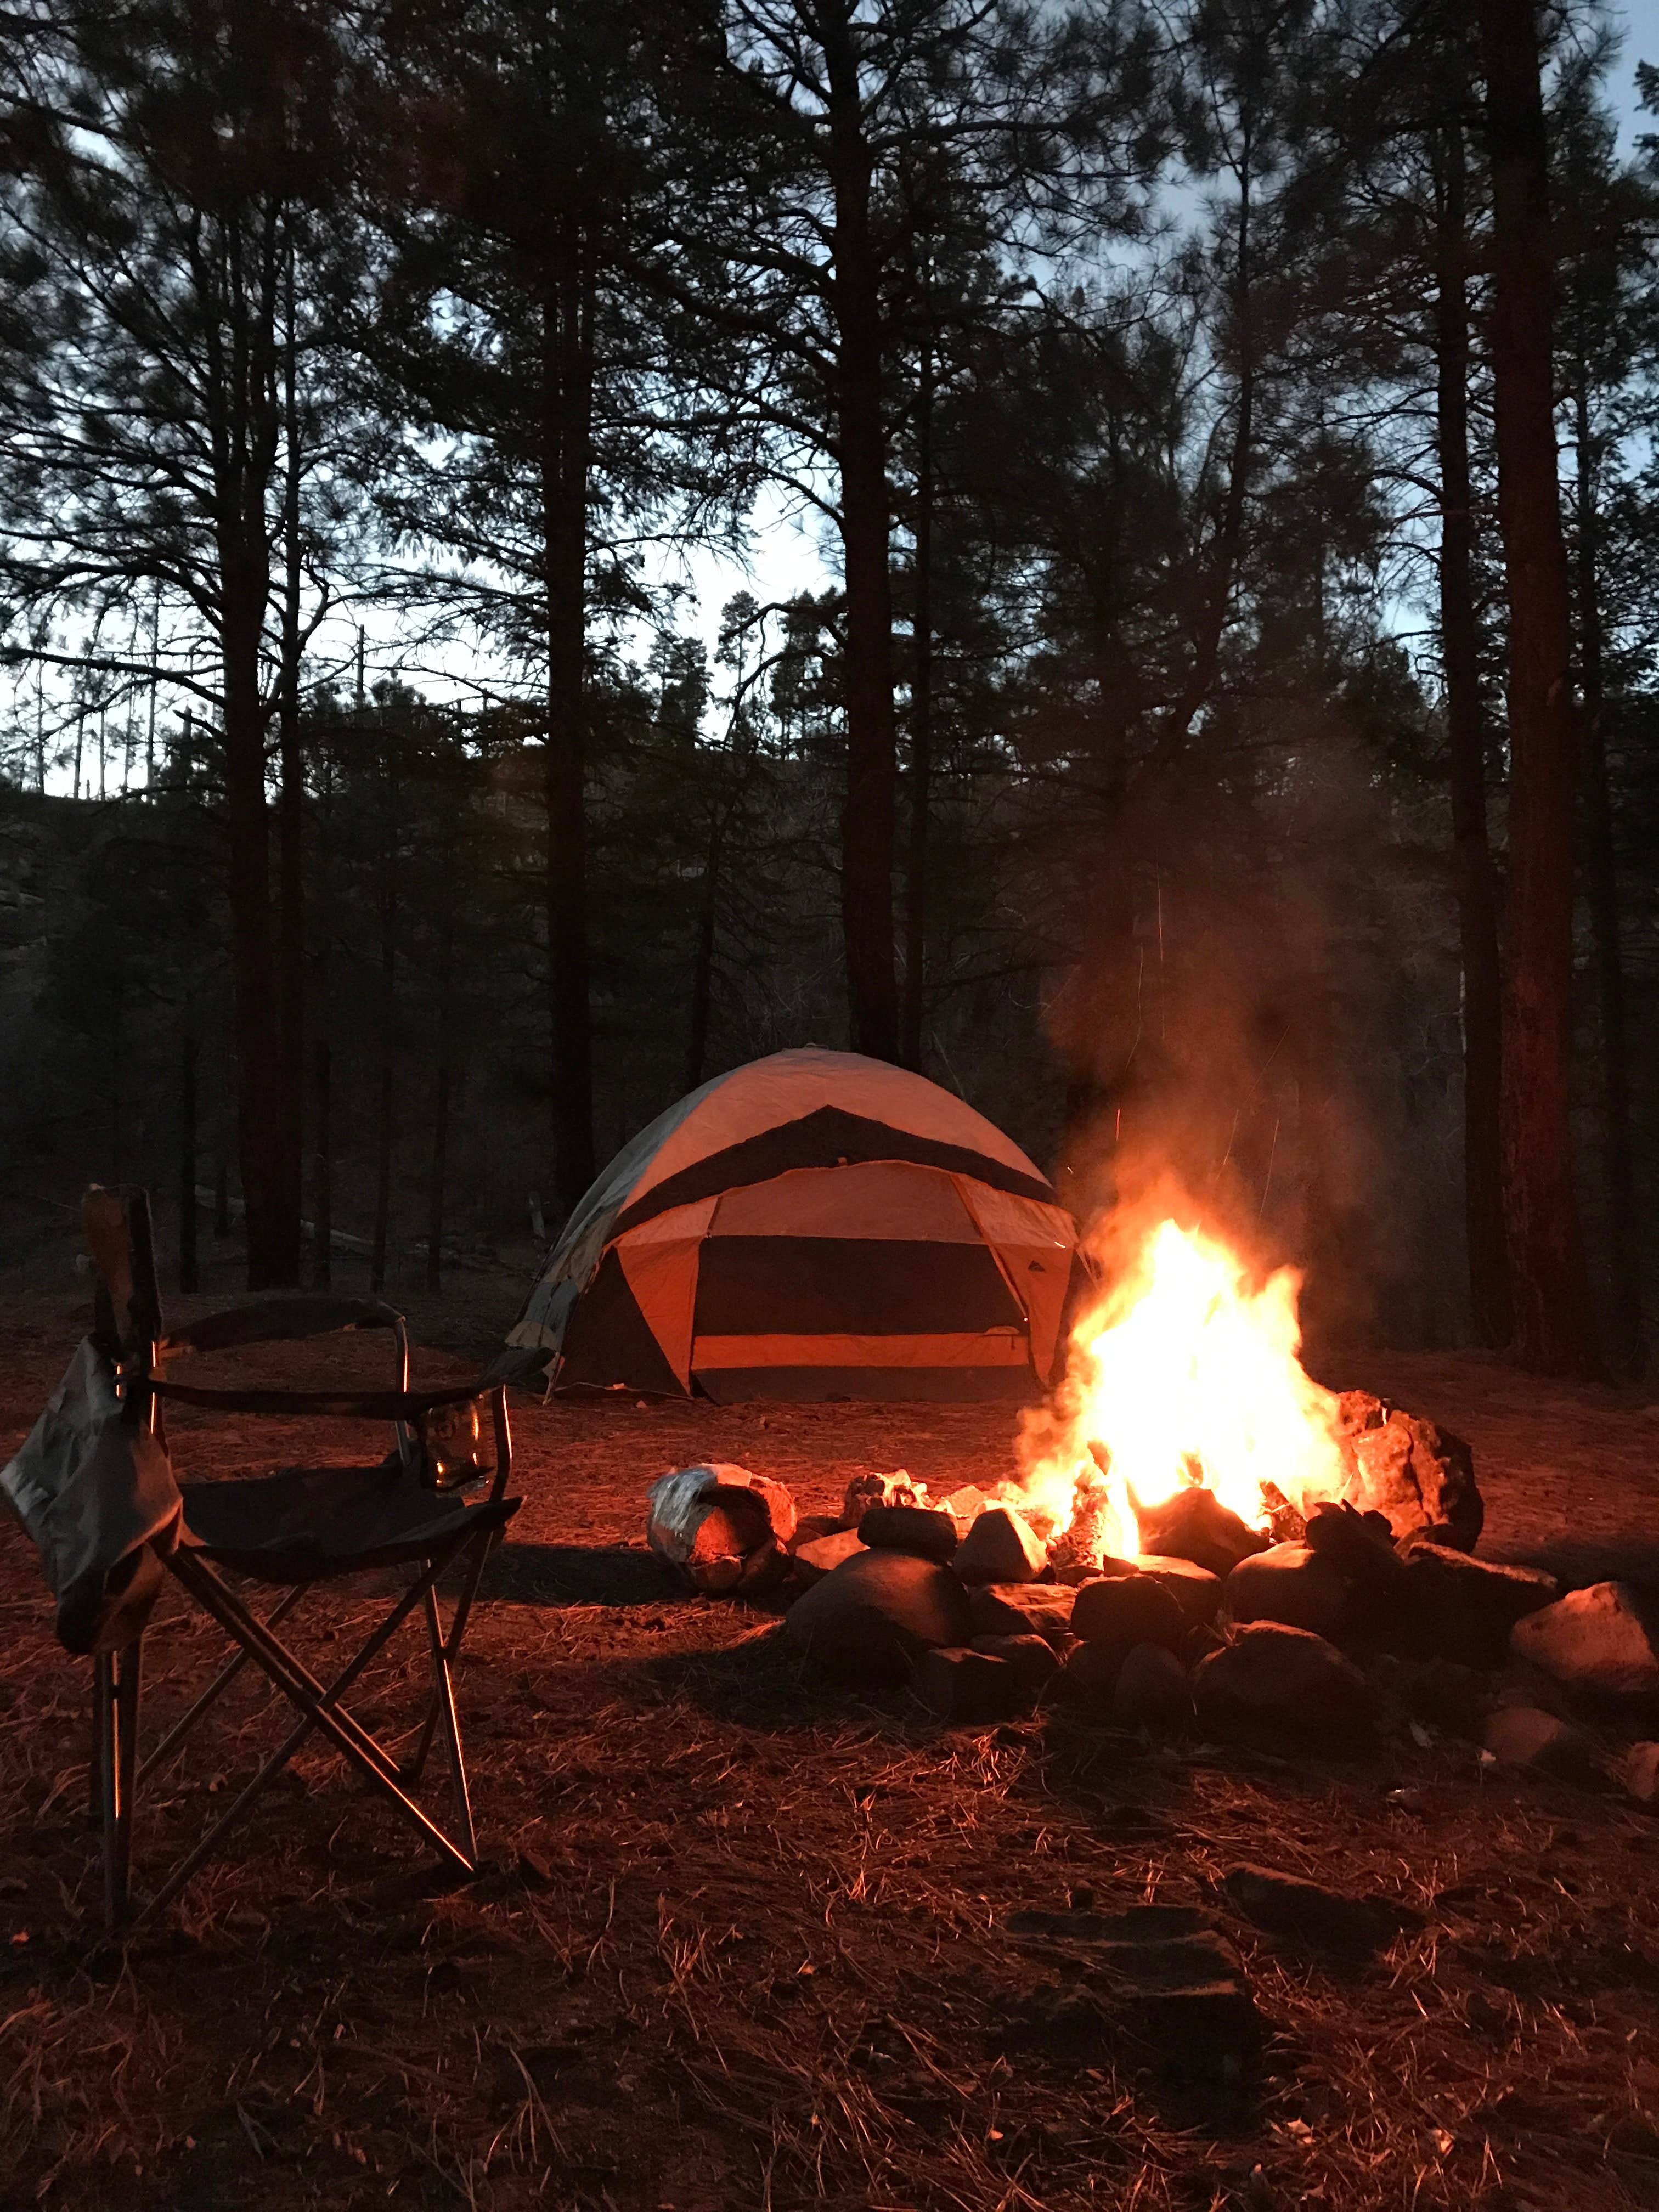 Camper submitted image from Black Canyon Rim Campground (apache-sitgreaves National Forest, Az) - 5